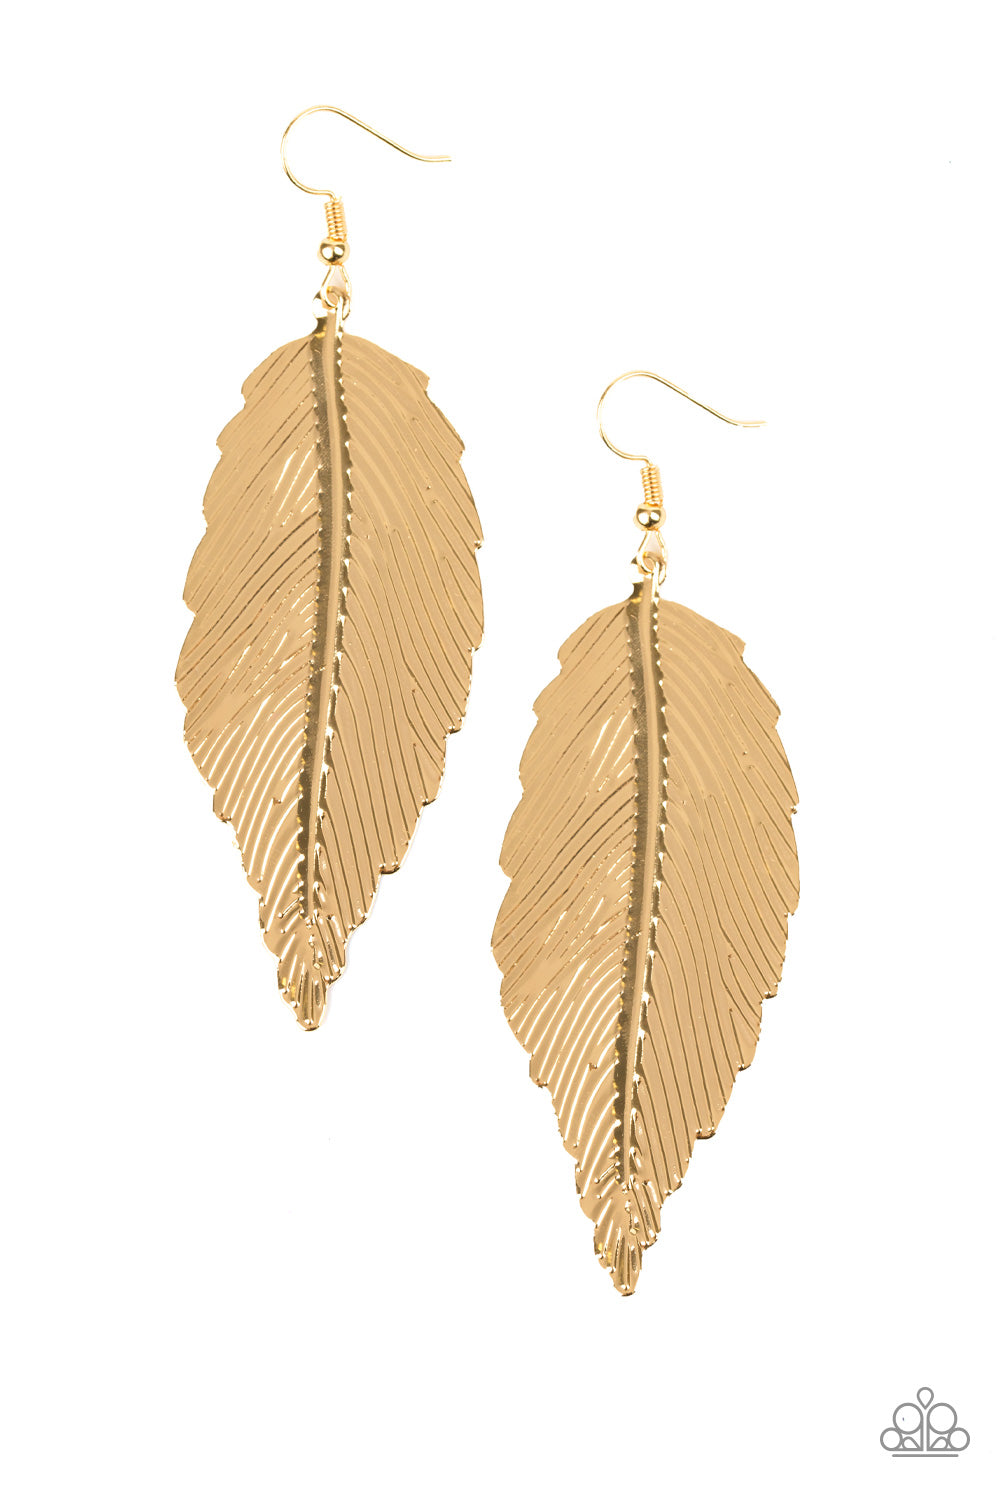 LOOKIN FOR A FLIGHT - GOLD FEATHER TEXTURE EARRINGS